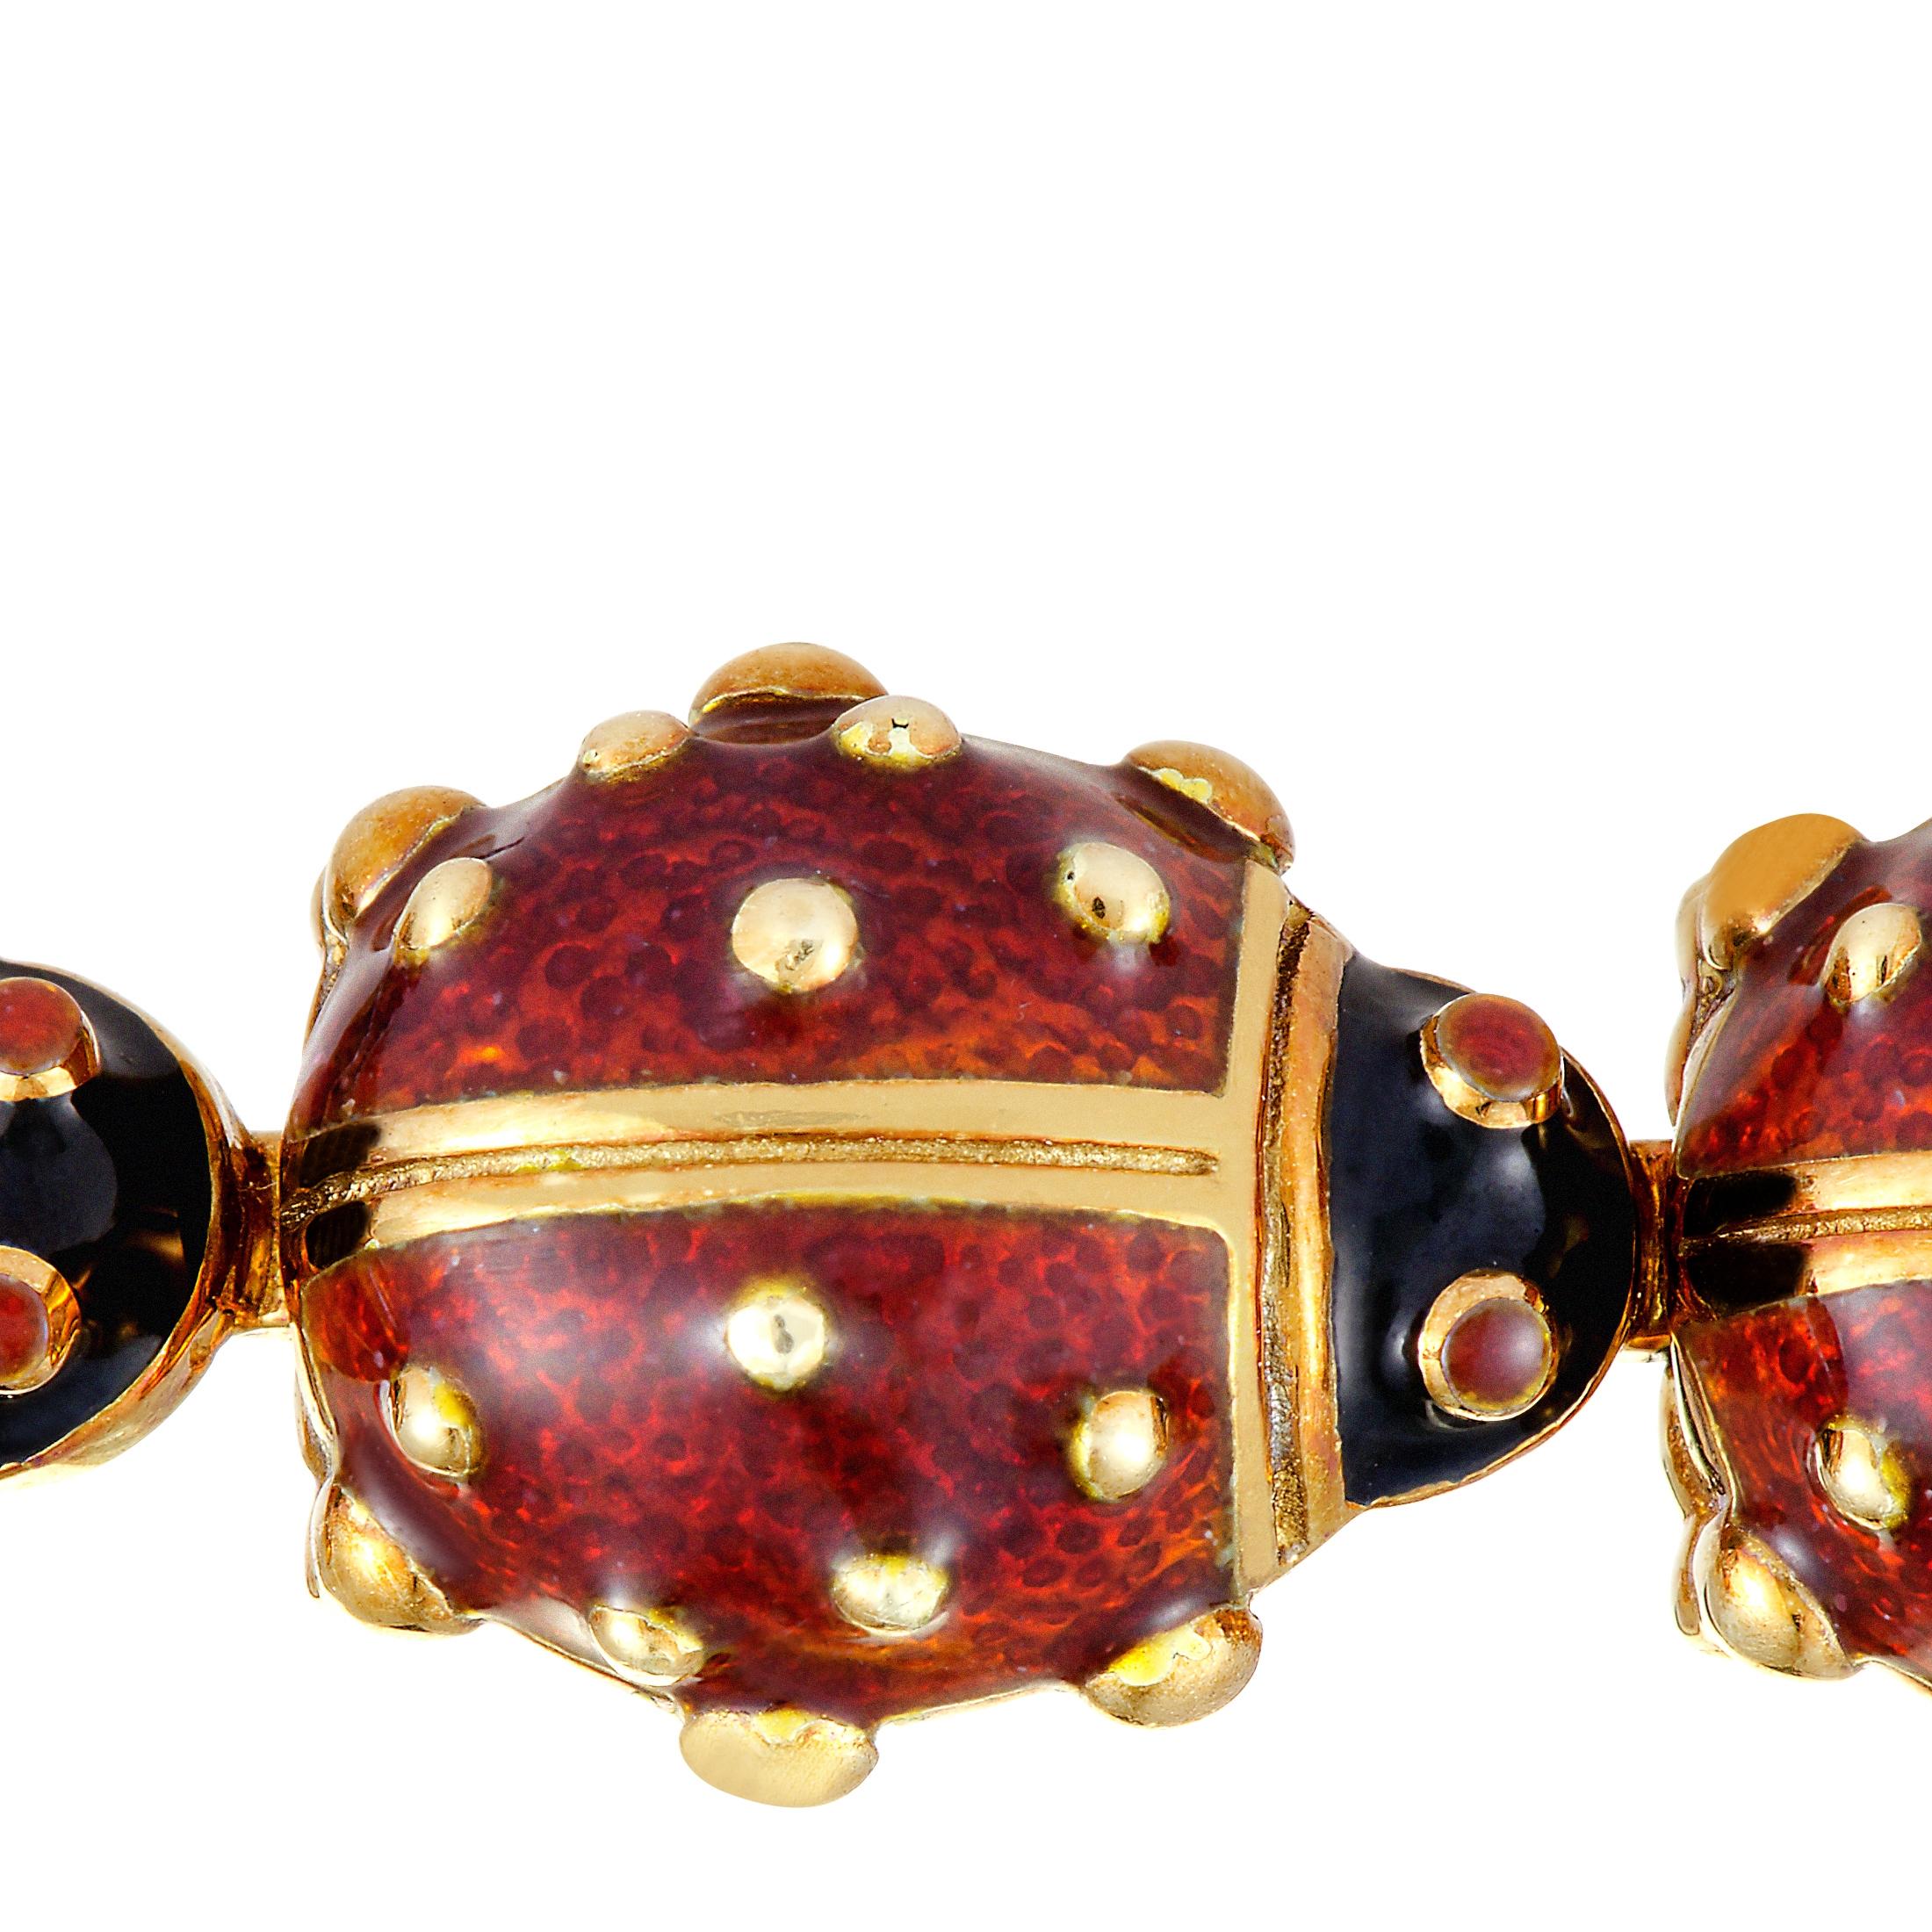 This Hidalgo ladybug bracelet is made of enameled 18K yellow gold. It weighs 45.2 grams, measuring 6.75” in length.

The bracelet is offered in estate condition and includes a gift box.